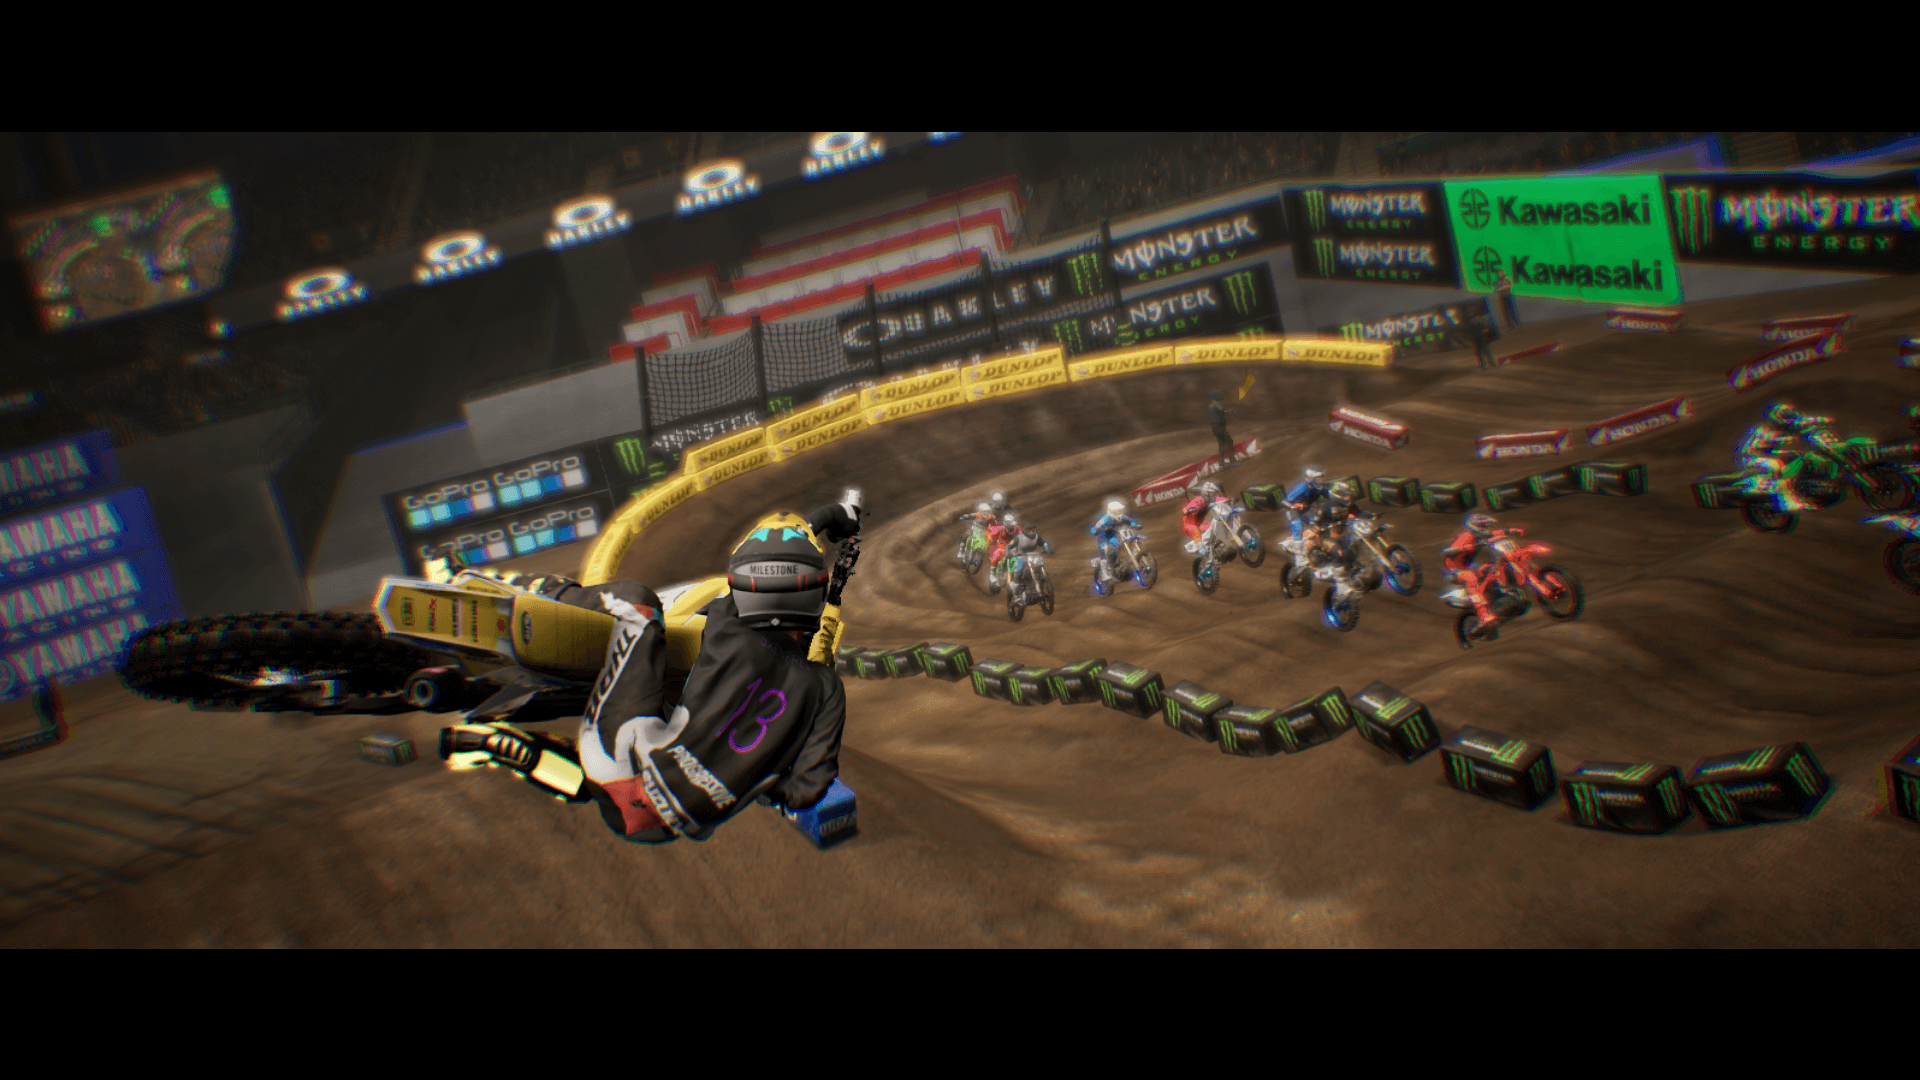 An in-game screenshot of Monster Energy Supercross 6, showcasing a racer executing a scrub, while other riders are catching up to them in the background.